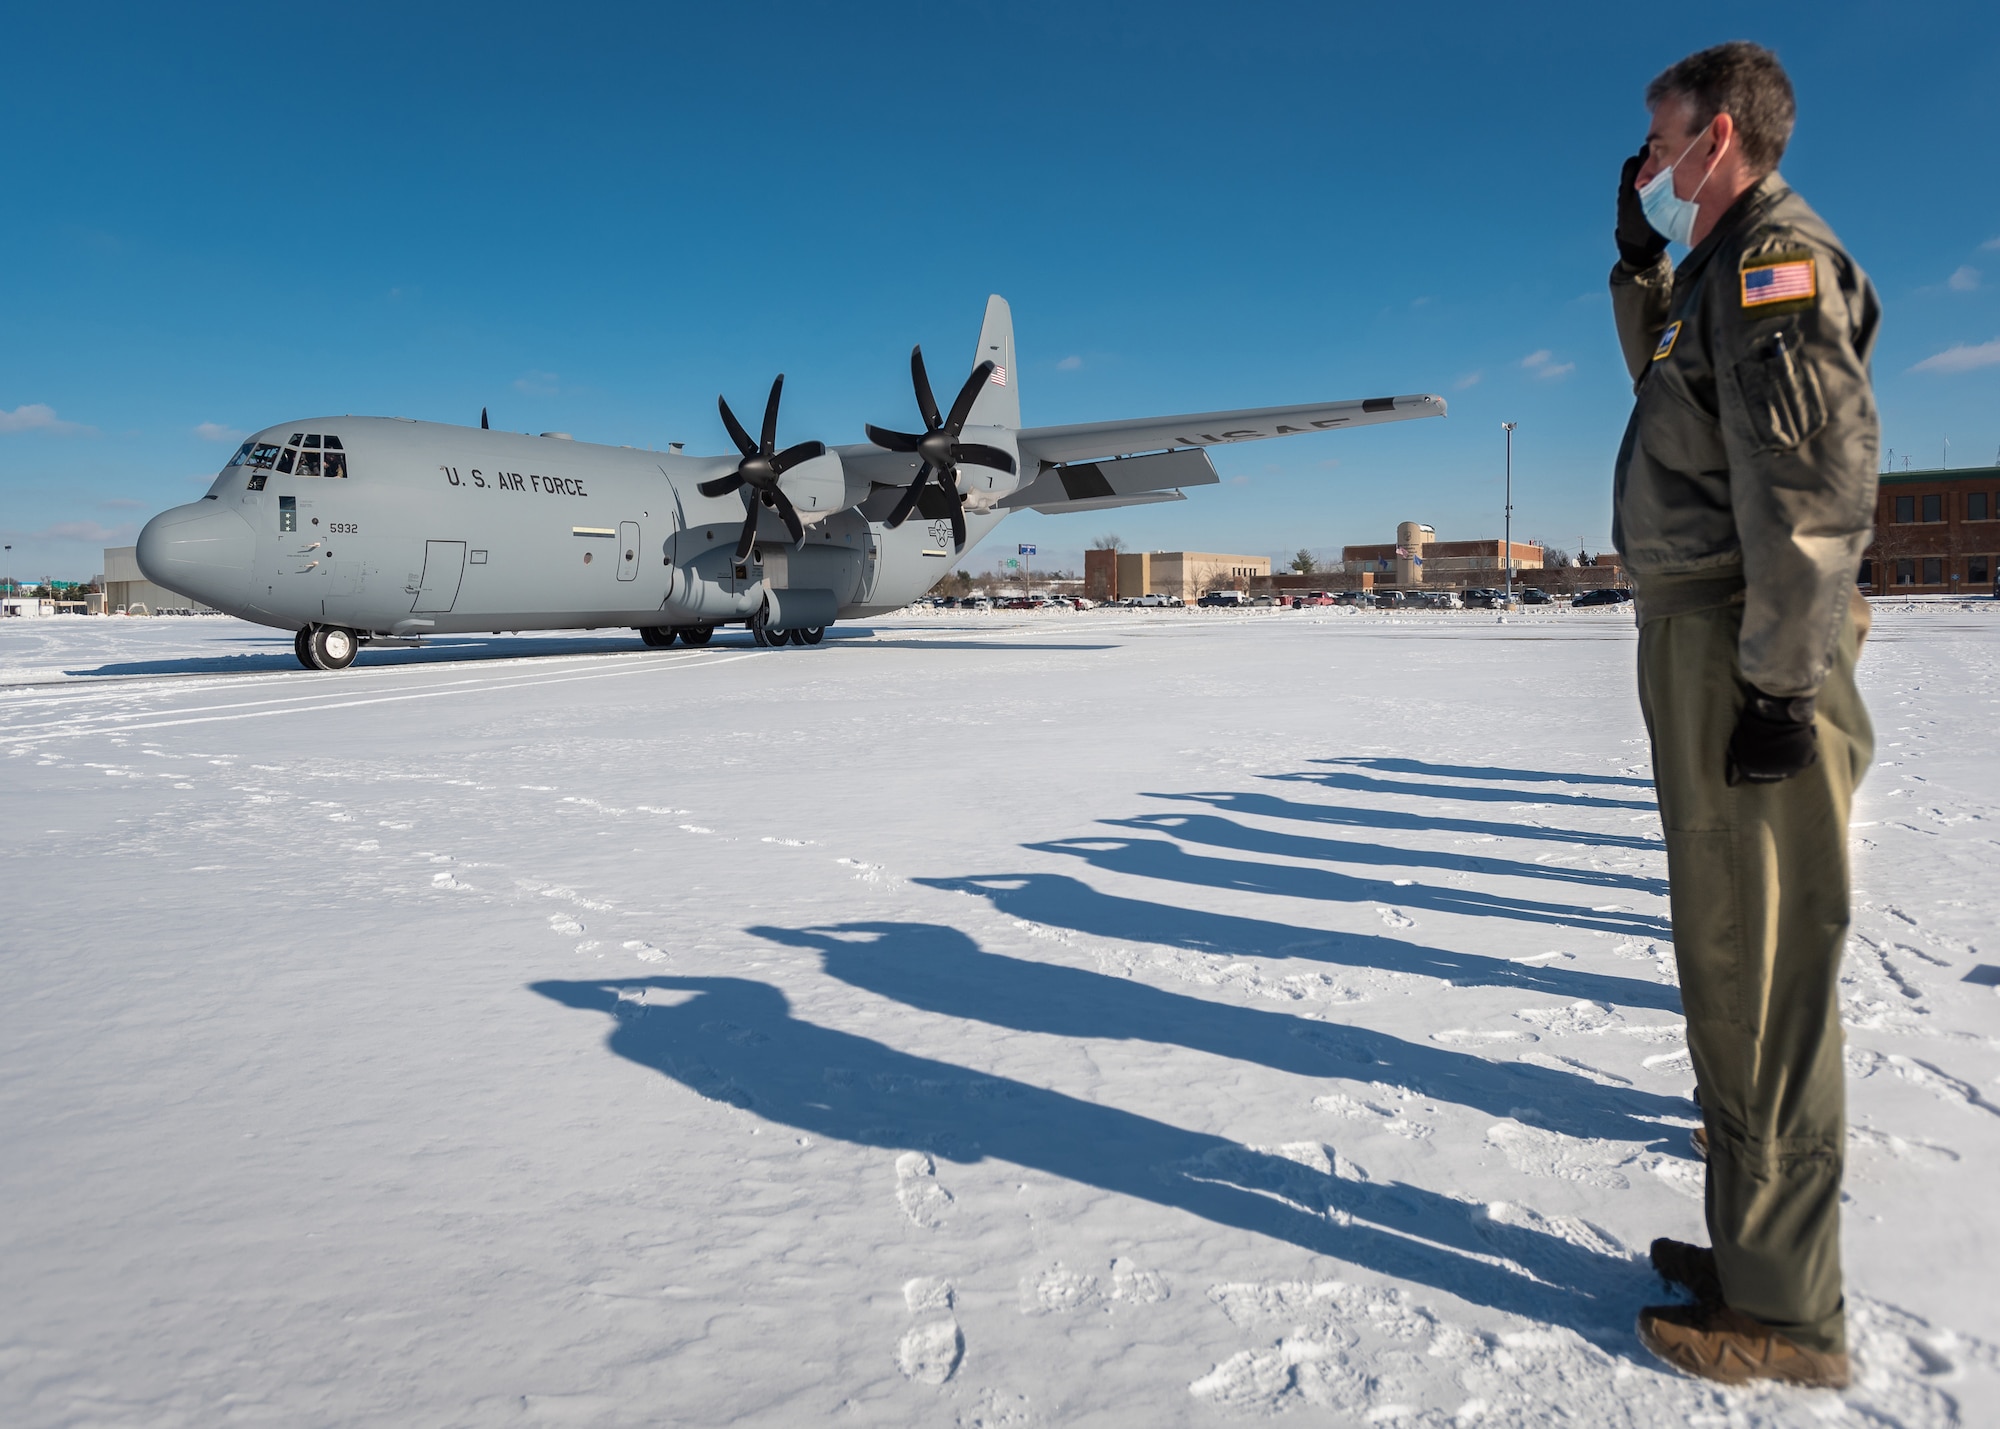 A new U.S. Air Force C-130J Super Hercules aircraft arrives at the Kentucky Air National Guard Base in Louisville, Kentucky, Jan. 7, 2022, with the director of the Air National Guard, U.S. Air Force Lt. Gen. Michael A. Loh, on board as unit leadership renders a salute. The aircraft, being delivered to the 123rd Airlift Wing from the Lockheed-Martin factory in Marietta, Georgia, is the third of eight slated for the unit, which is converting from legacy C-130H transports. (U.S. Air National Guard photo by Dale Greer)